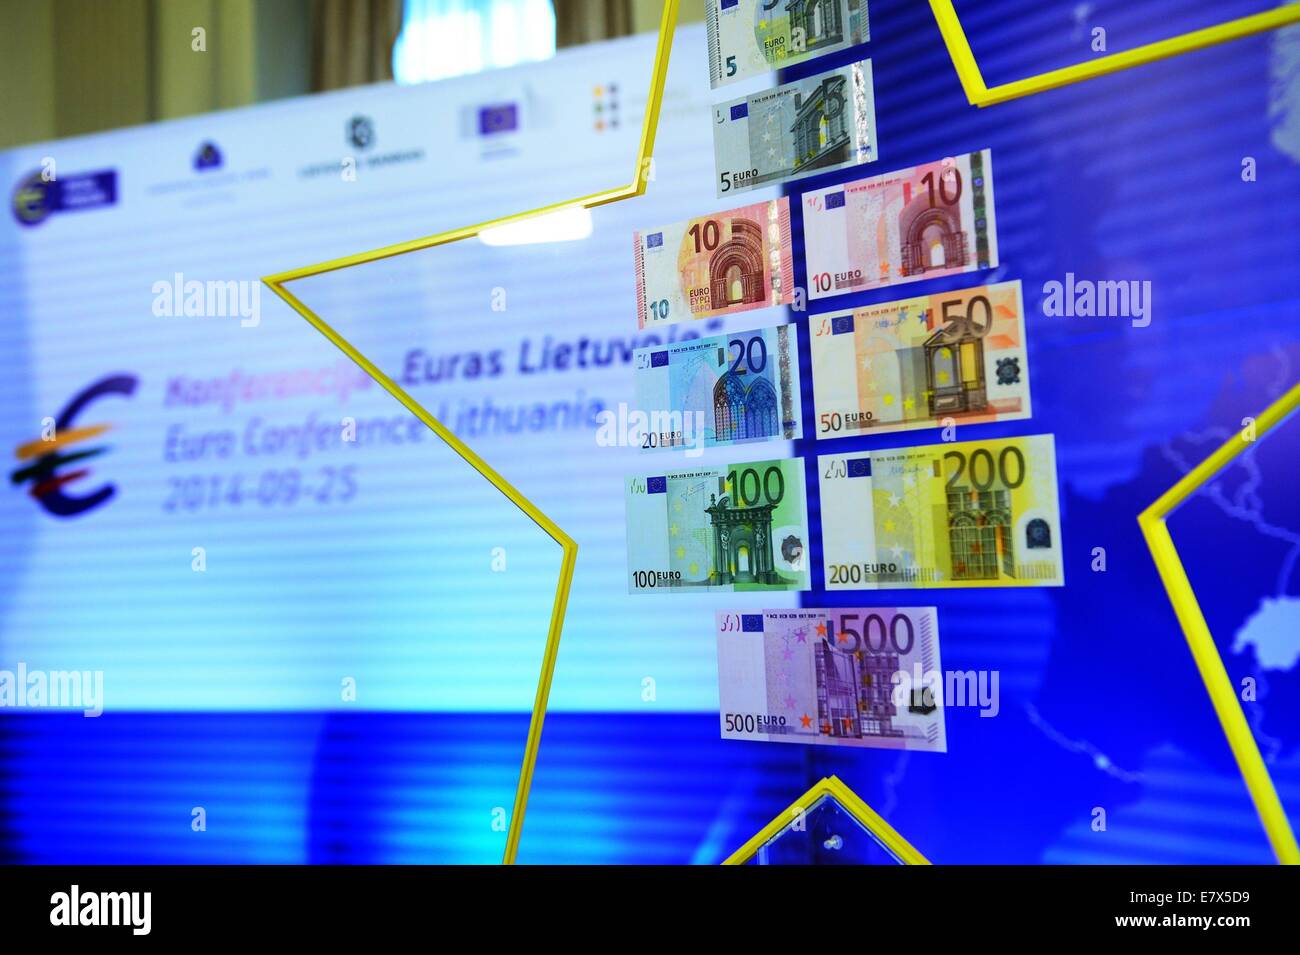 Vilnius. 25th Sep, 2014. Photo taken on Sept. 25, 2014, shows the 'Euro Star' in Vilnius, Lithuania. President of the European Central Bank (ECB) Mario Draghi handed over a Euro Star to chairman of Lithuania's Central Bank here on Thursday, a sign symbolizing Lithuania's membership in the euro area. Credit:  Alfredas Pliadis/Xinhua/Alamy Live News Stock Photo